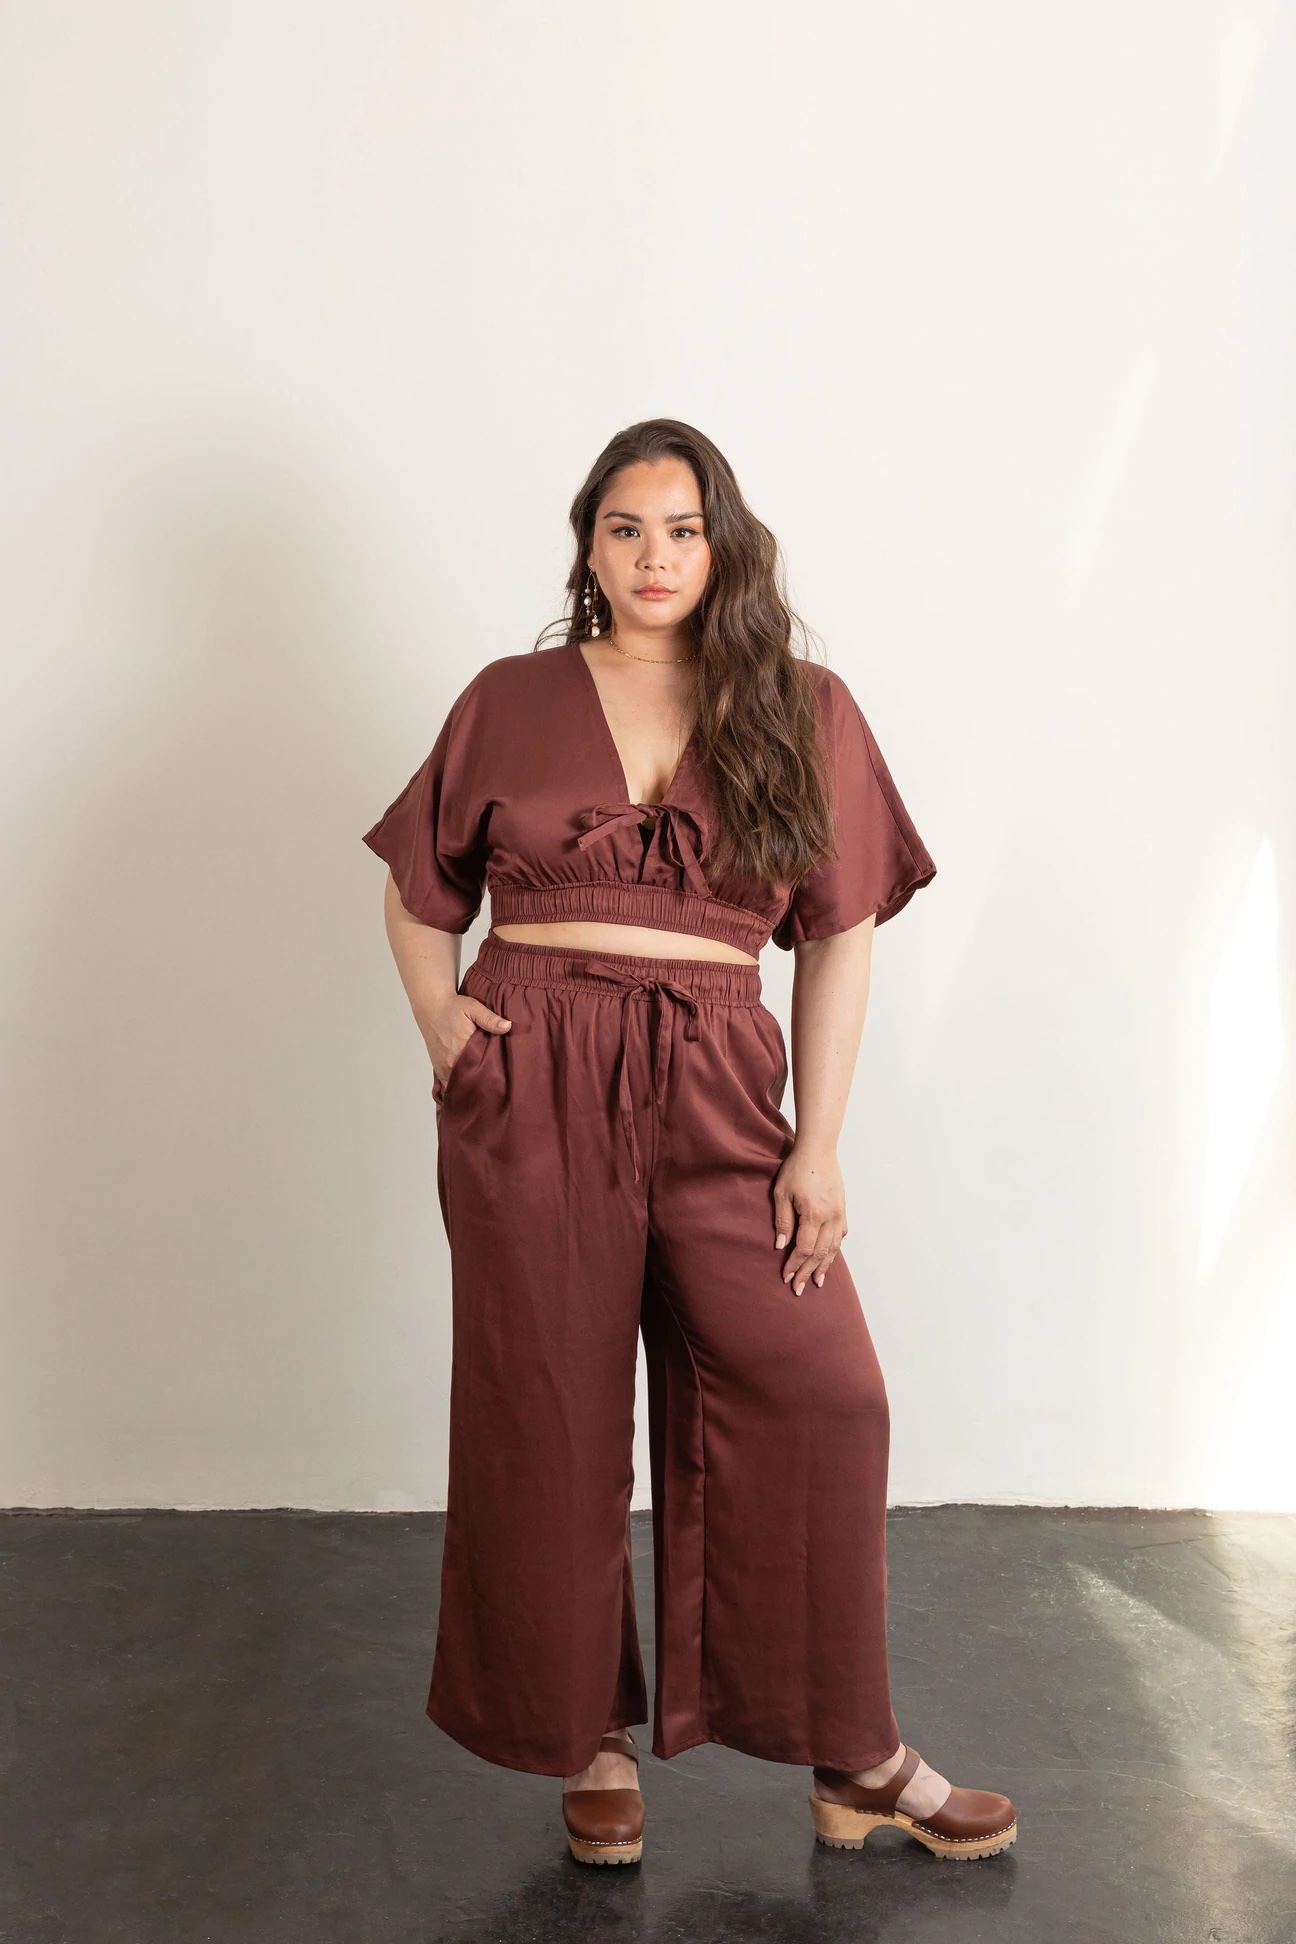 Woman wearing the Saguaro Set sewing pattern from Friday Pattern Company on The Fold Line. A trouser and top pattern made in linen, rayon, tencel, silk or cottons fabrics, featuring trousers with wide legs, relaxed fit, pockets, elasticated waist with drawstring. The top has a plunging V neckline with tie closure, elbow length sleeves, cropped length and relaxed fit.